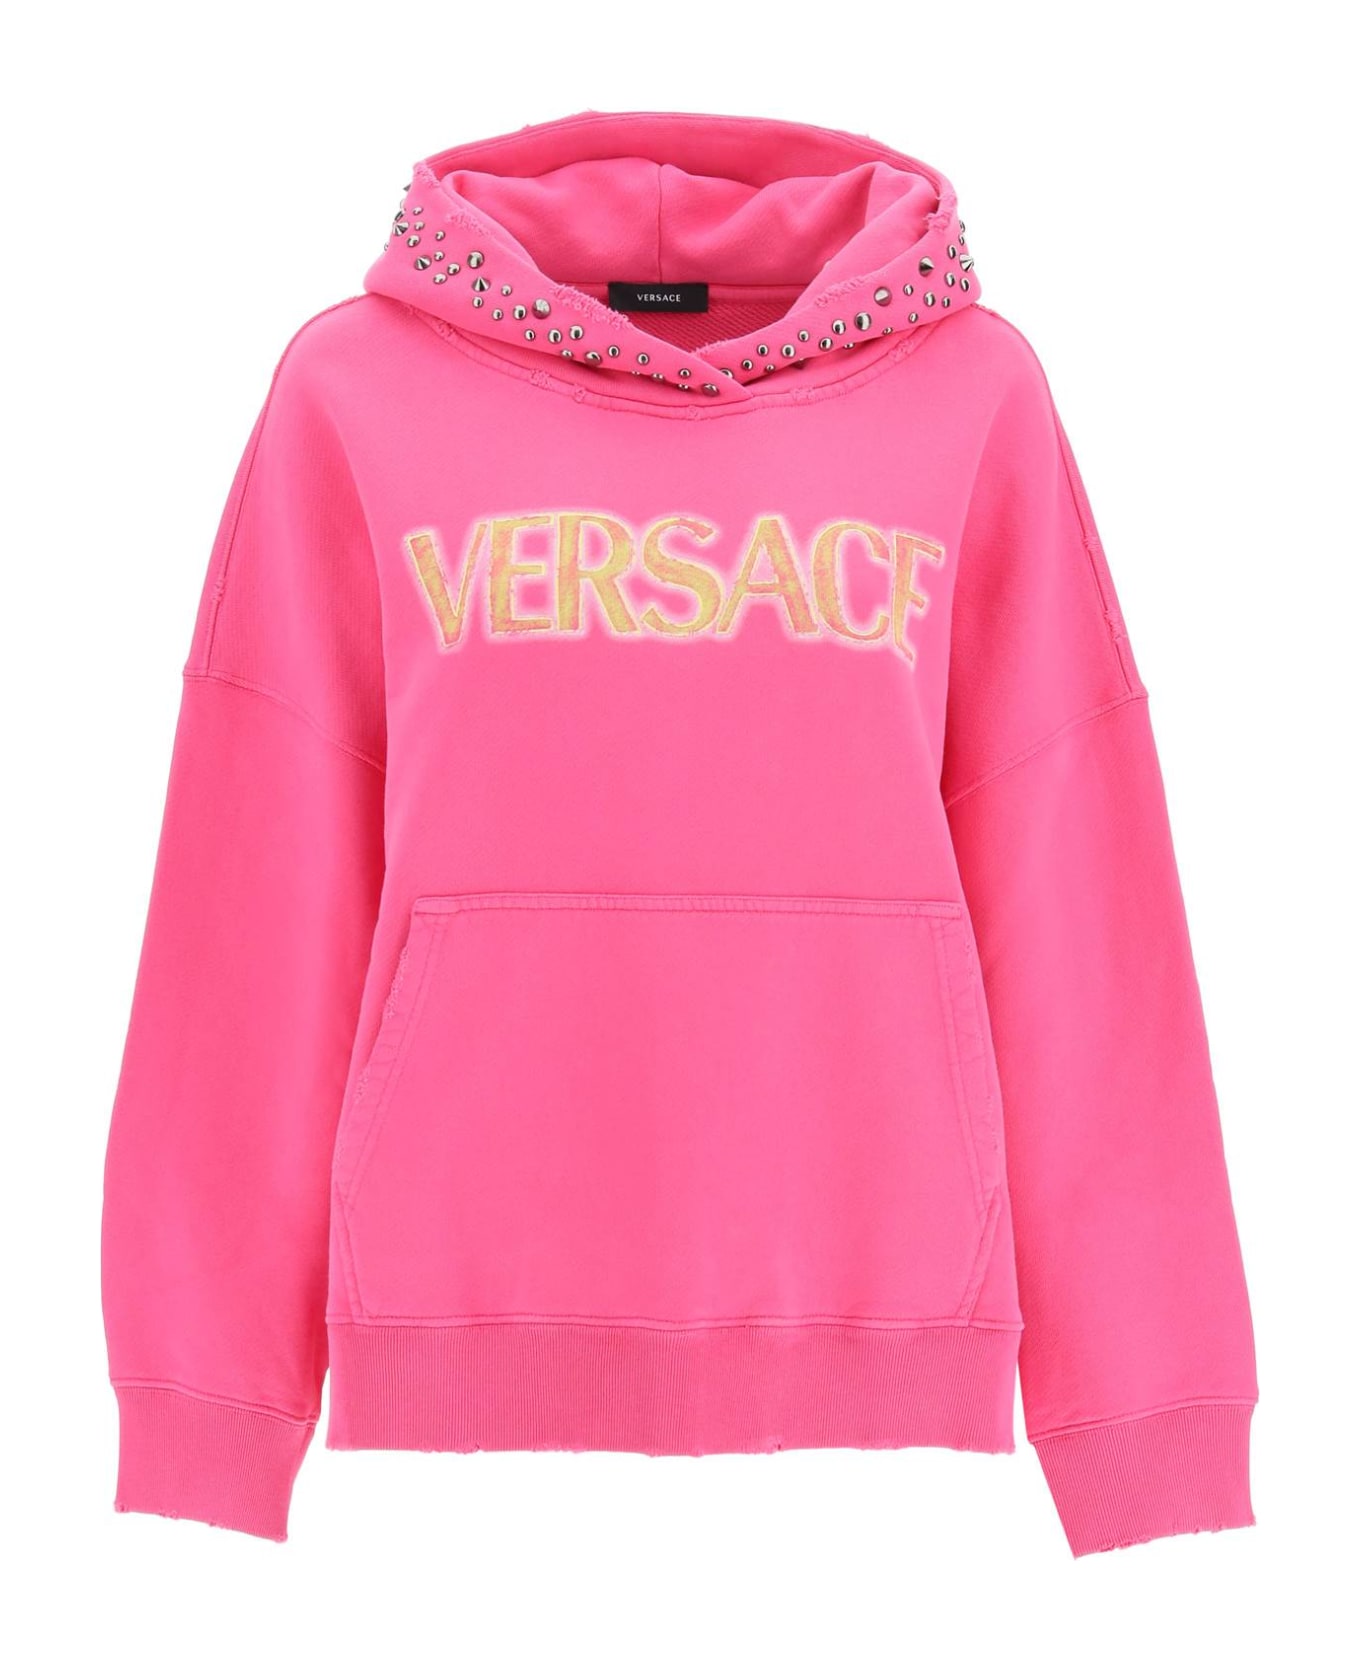 Versace Hoodie With Studs - Pink フリース